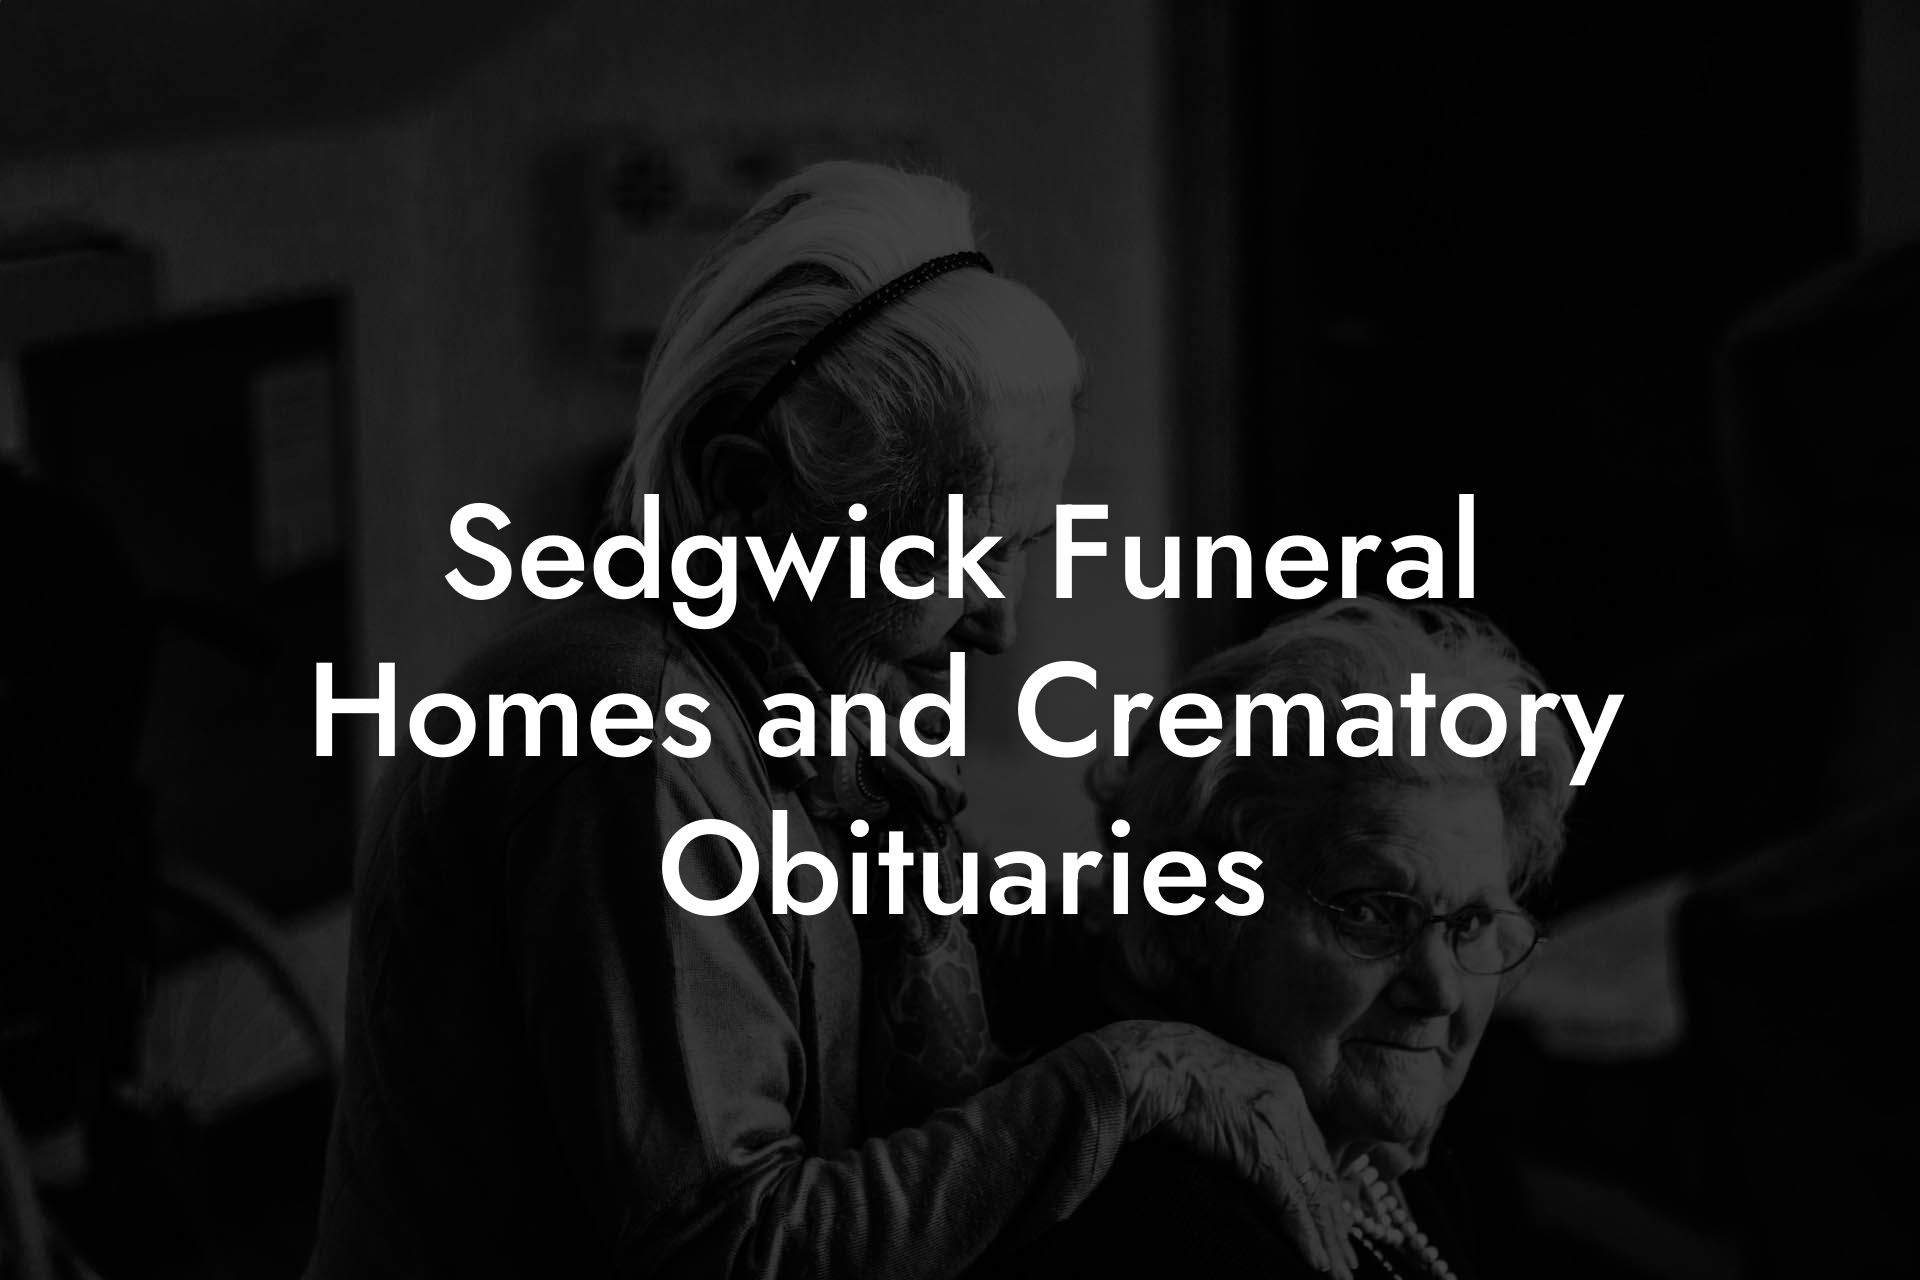 Sedgwick Funeral Homes and Crematory Obituaries